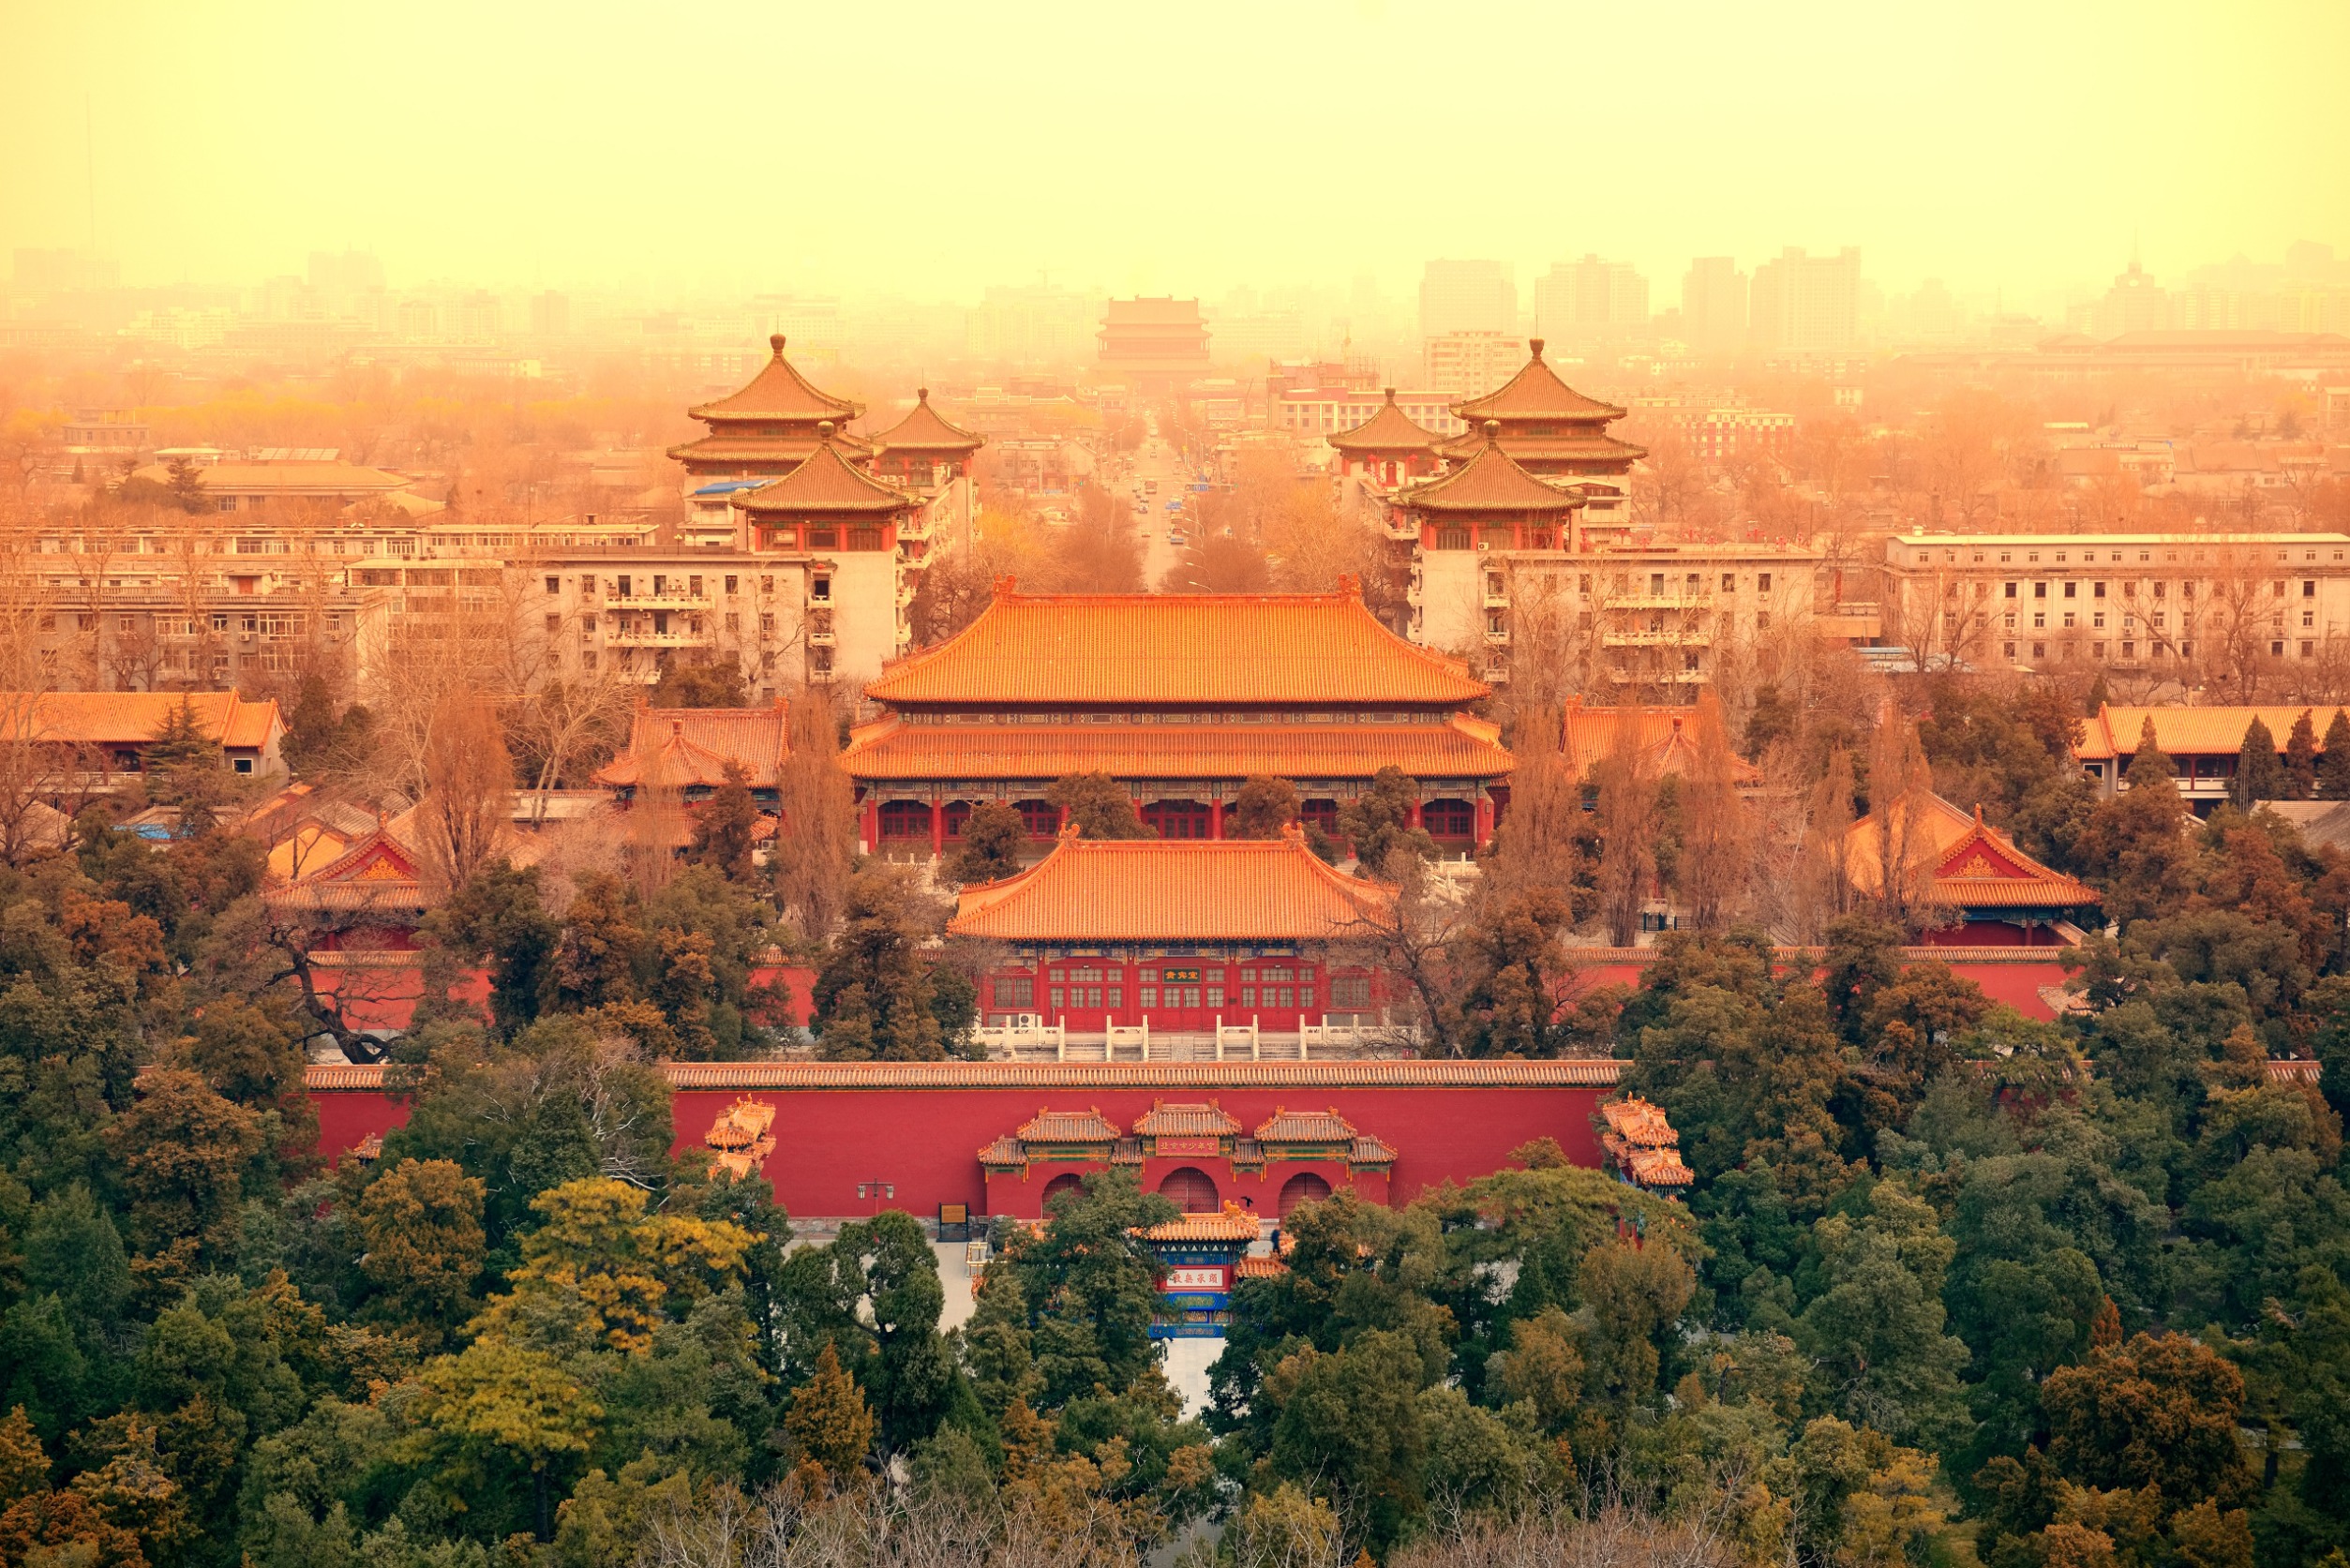 Aerial view of Beijing, China at dusk with historical Chinese architecture.